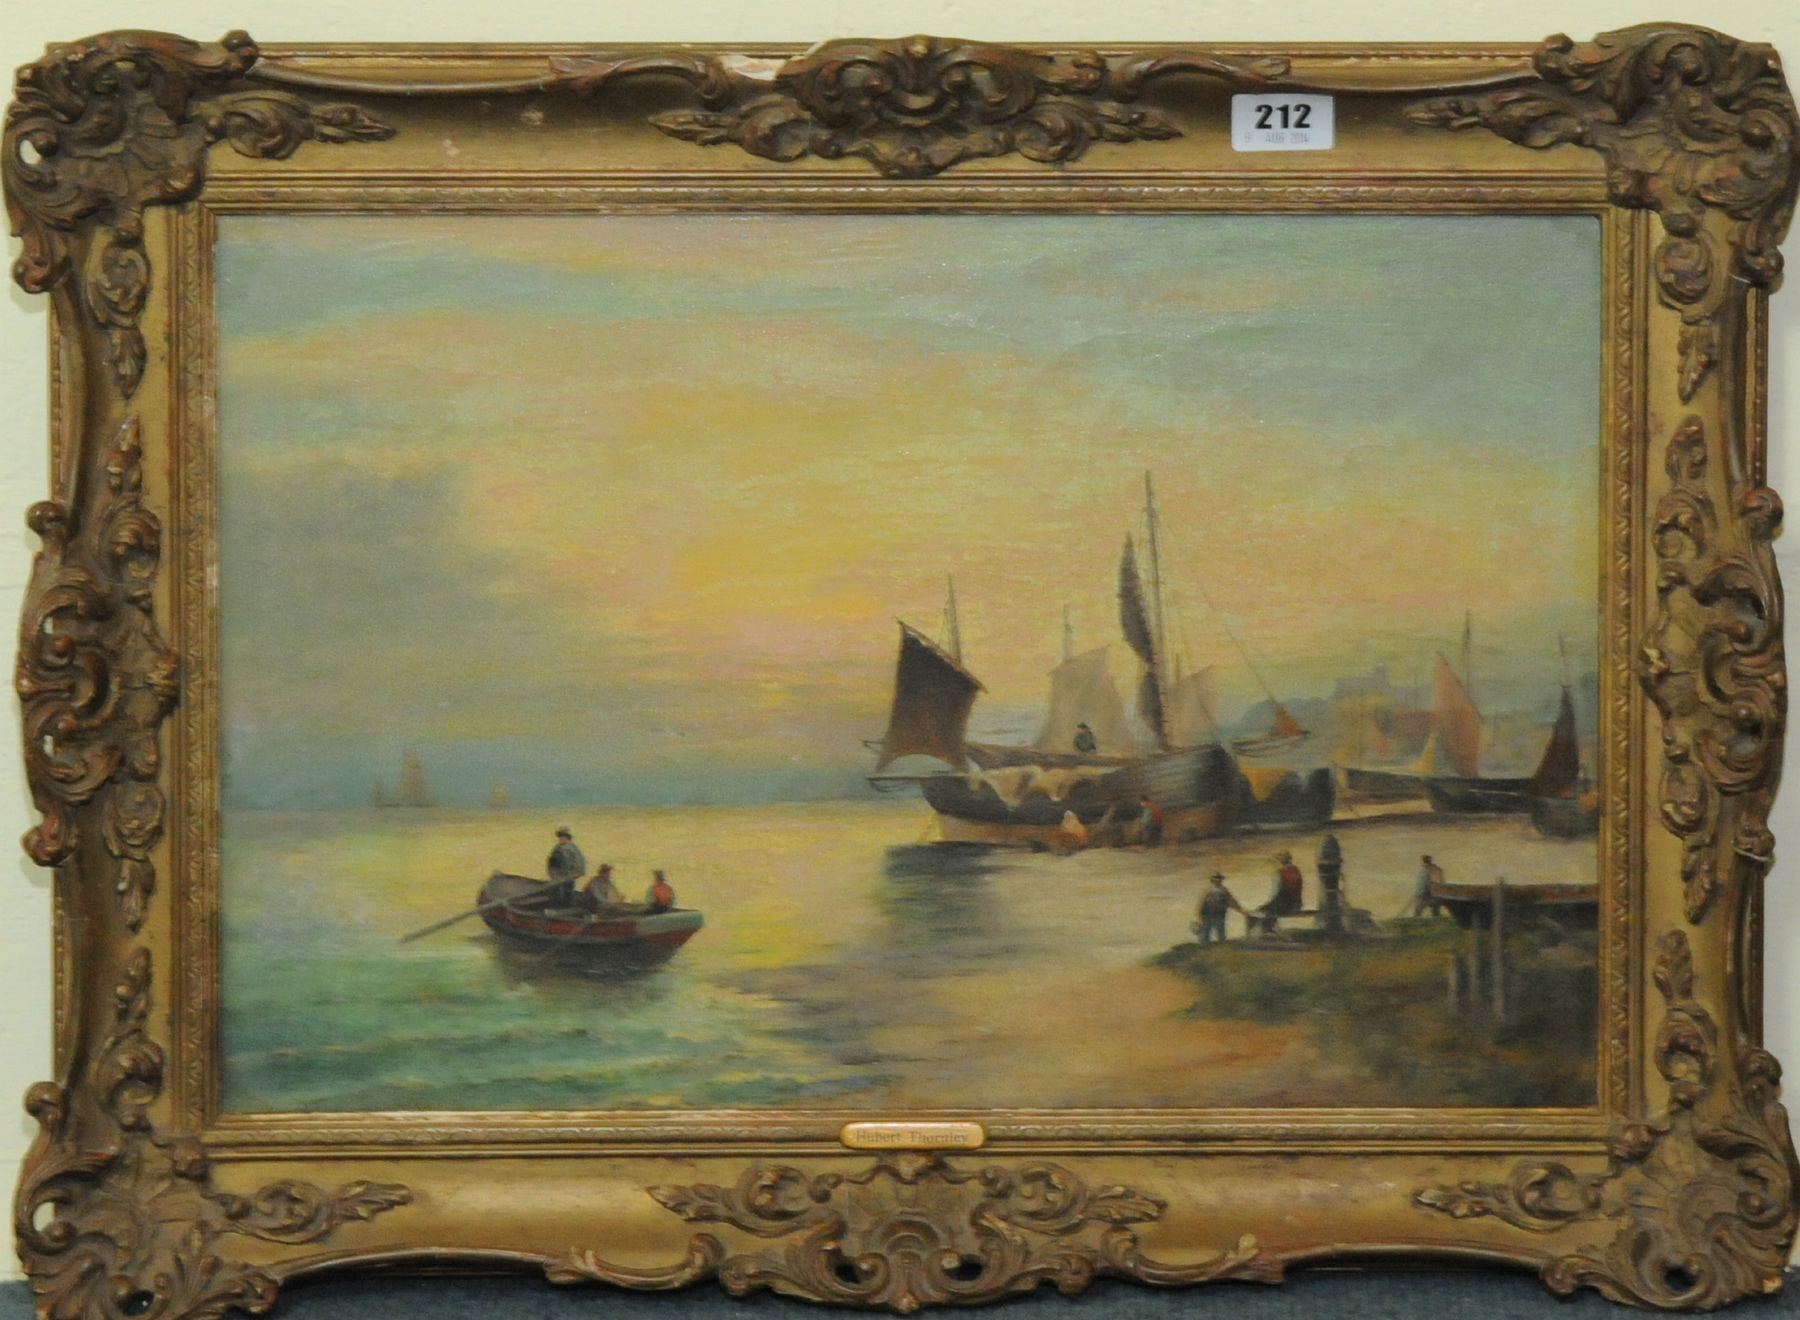 HUBERT THORNLEY.
Beached fishing boats.
Oil on canvas.
12" x 17¼". Signed.